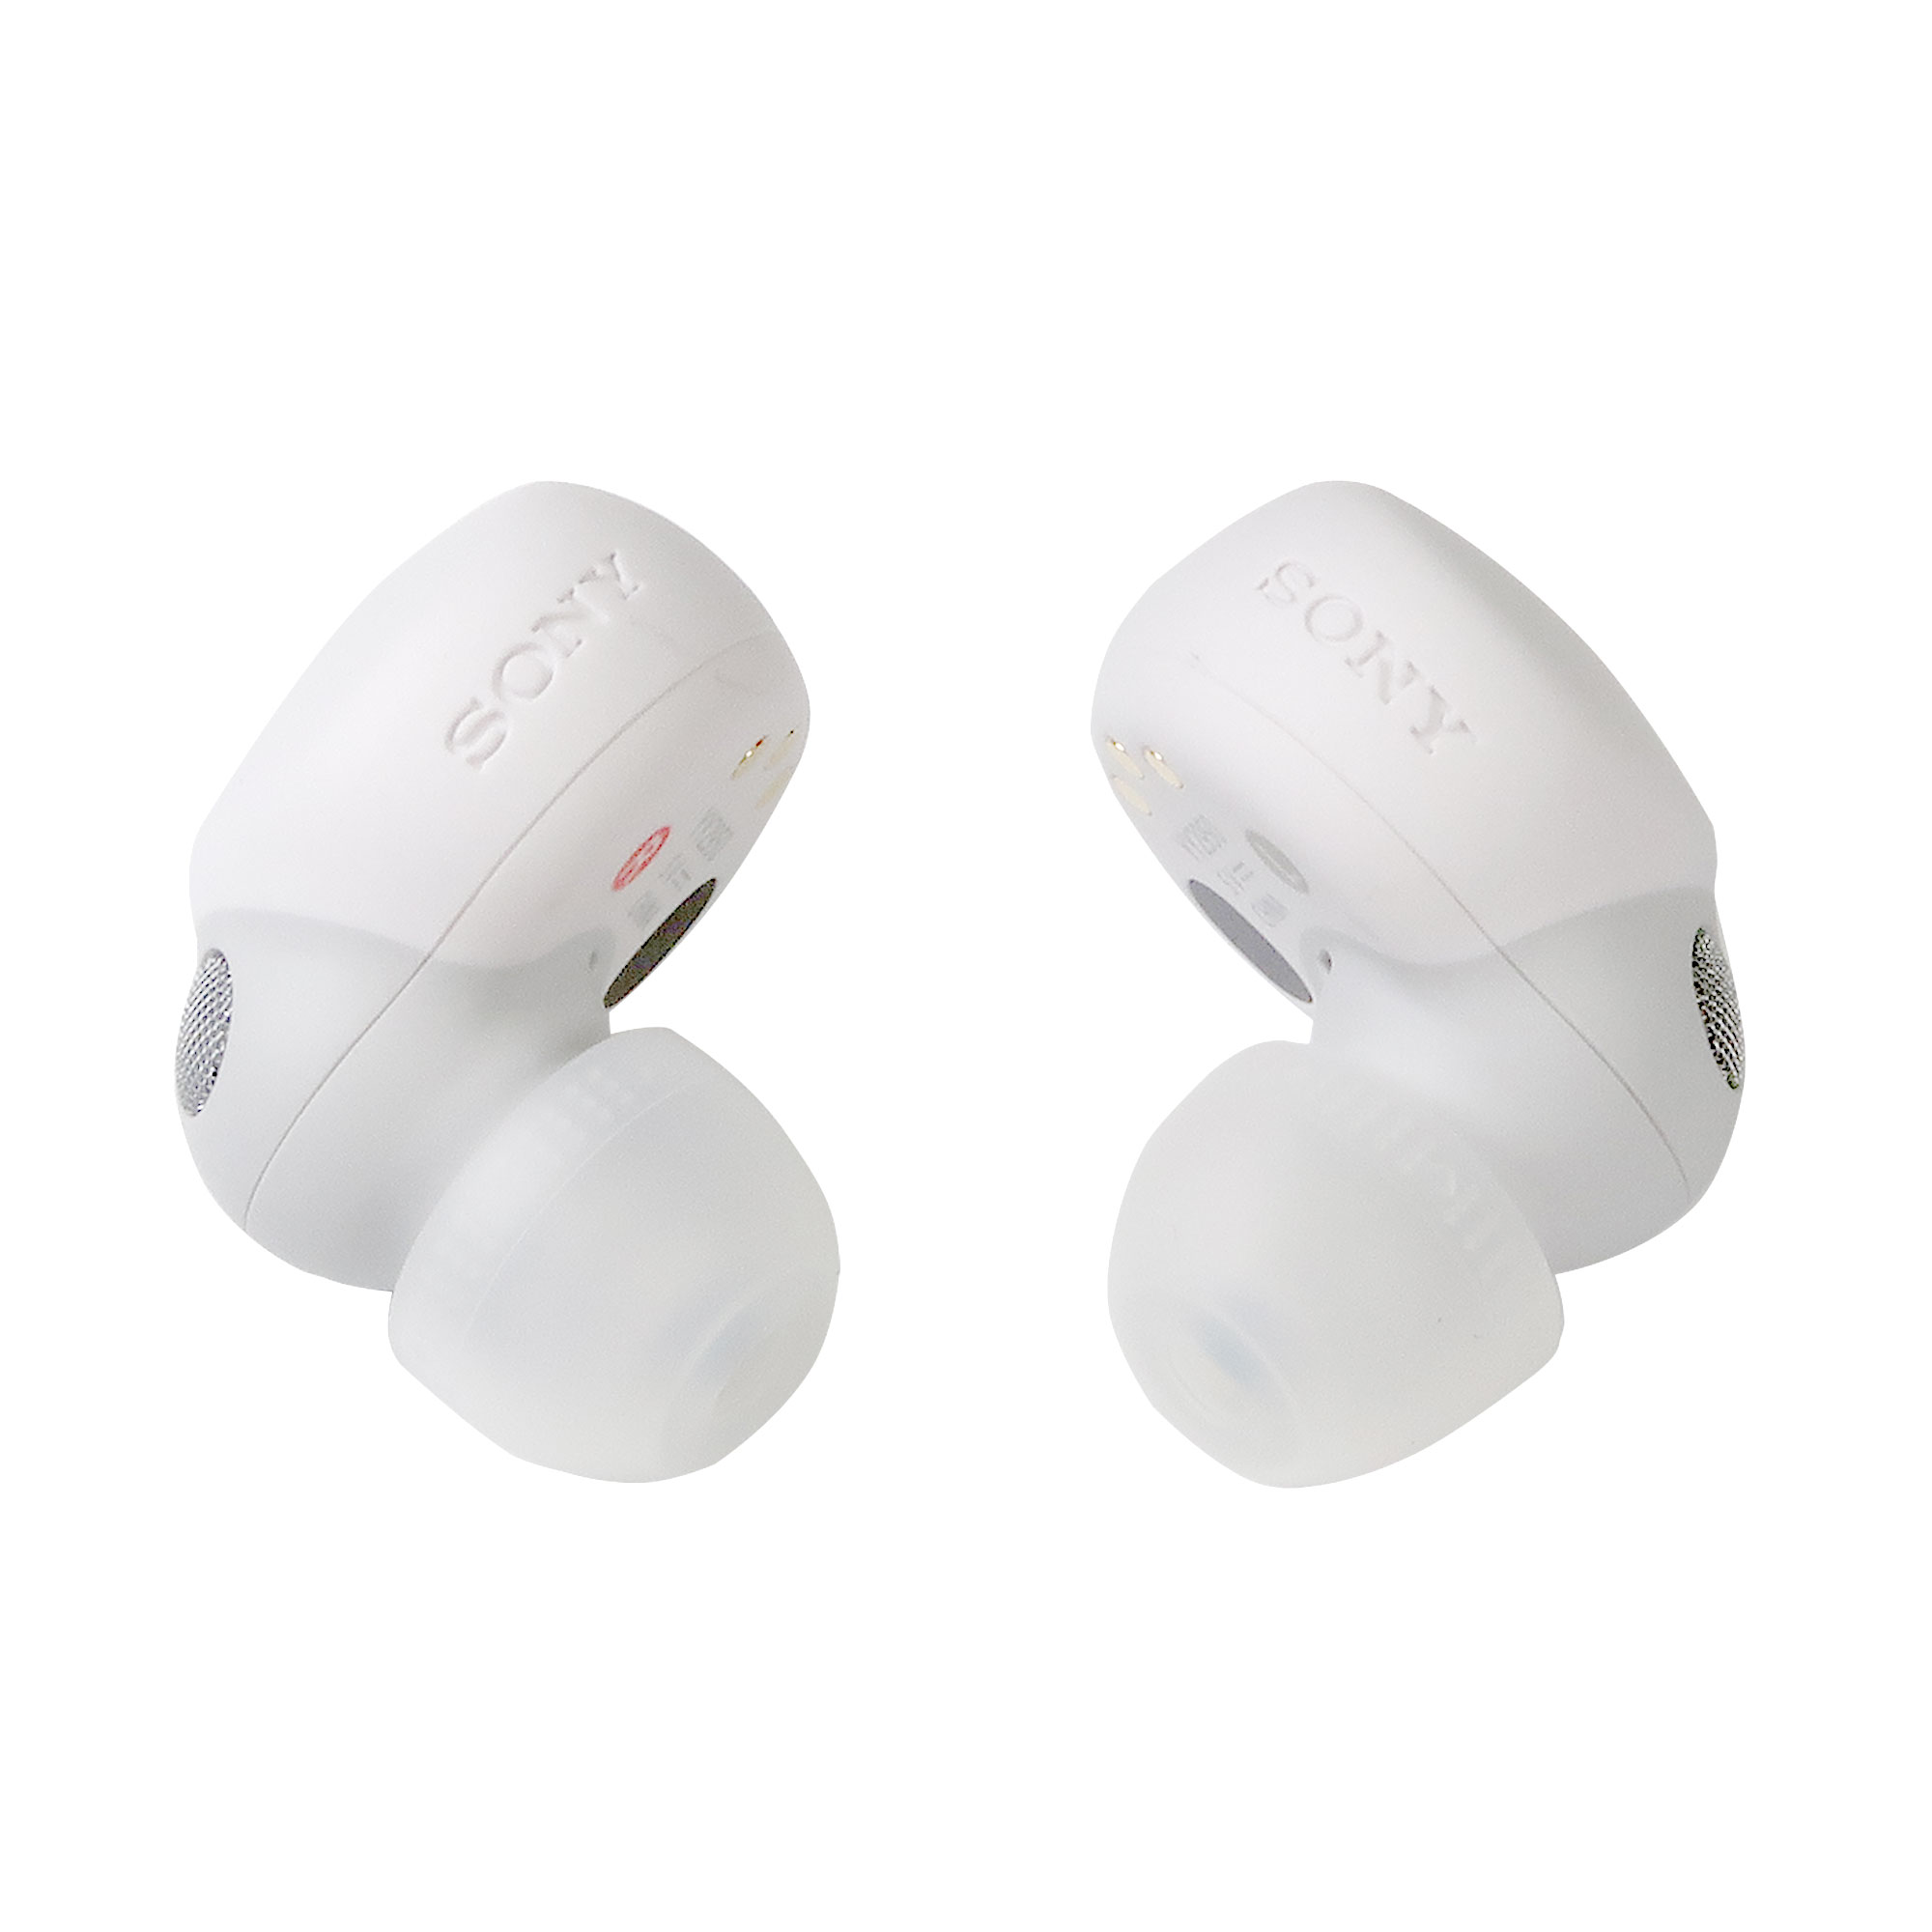 Sony LinkBuds S Truly Wireless Noise Canceling Earbuds - White 27242923393